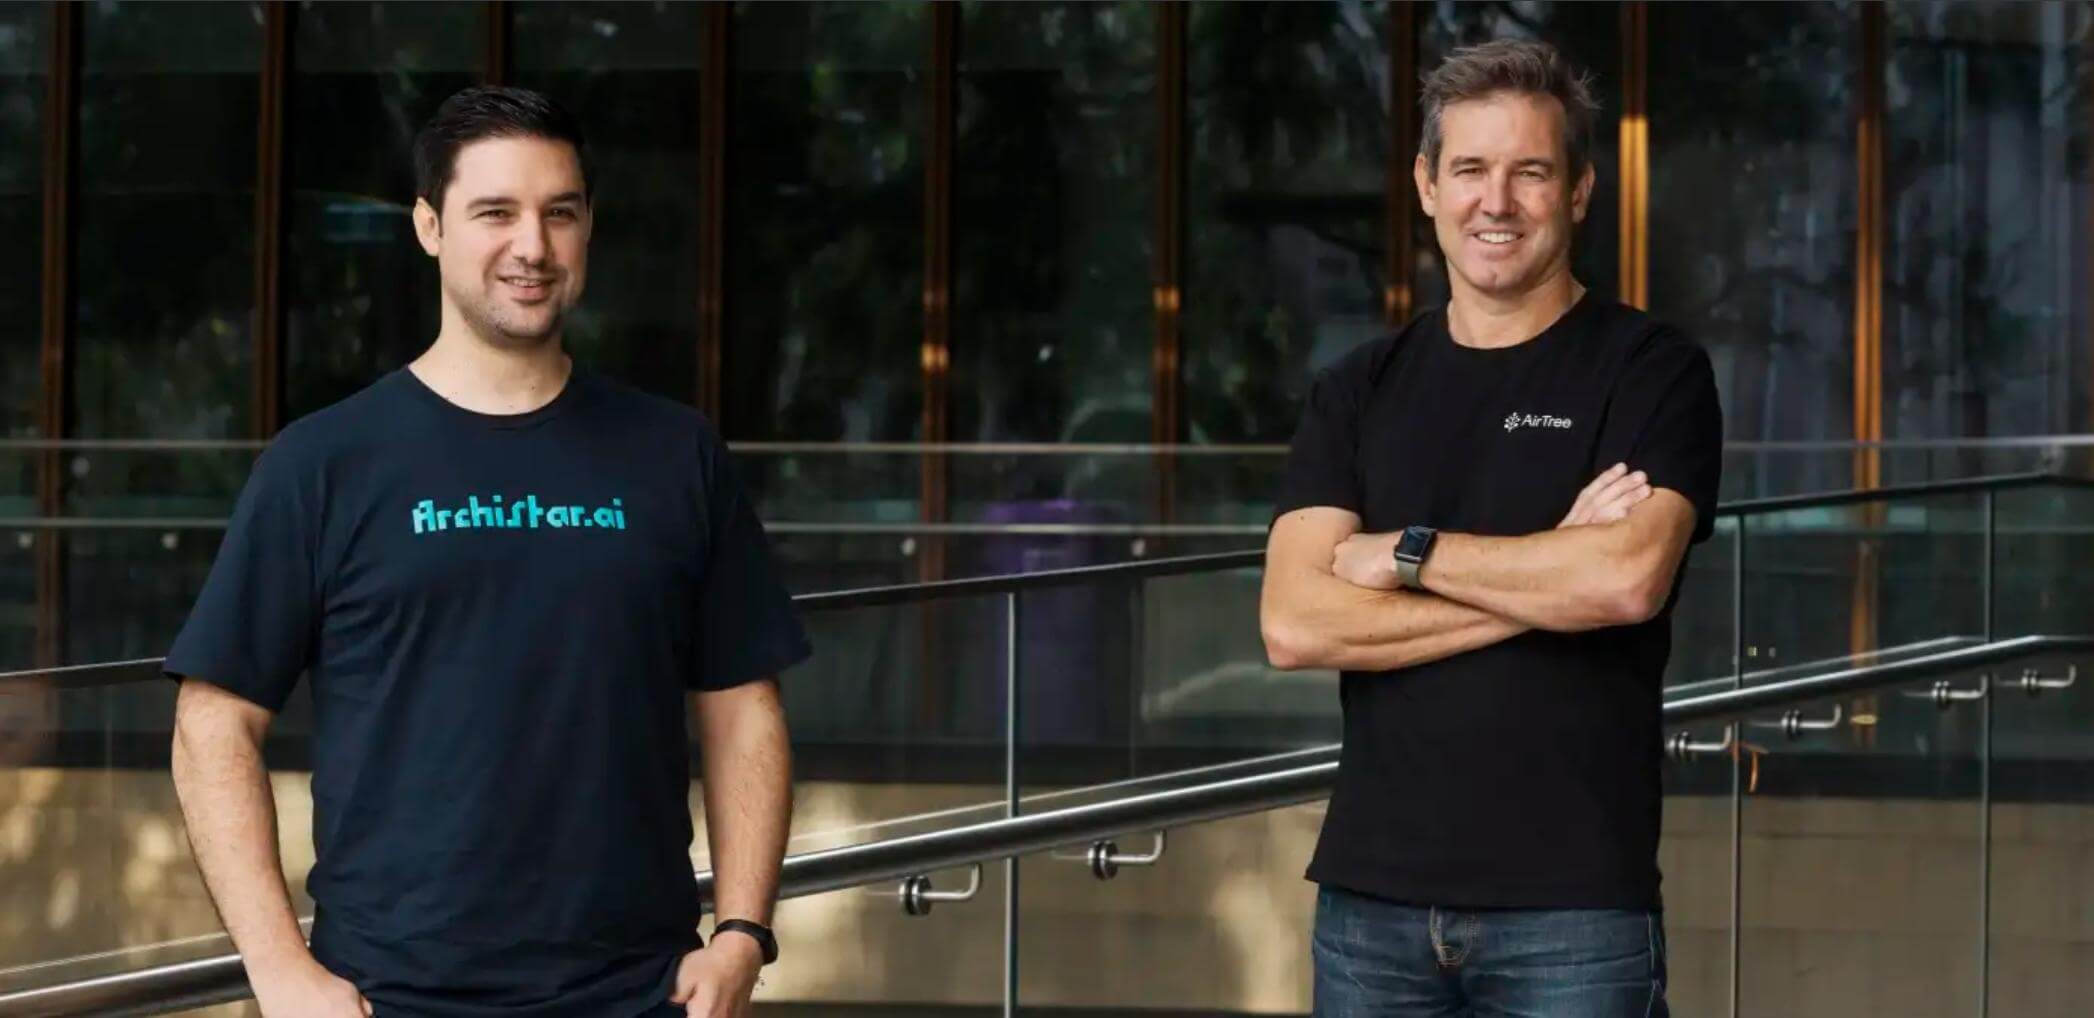 Archistar secures $6m Series A investment led by AirTree Ventures